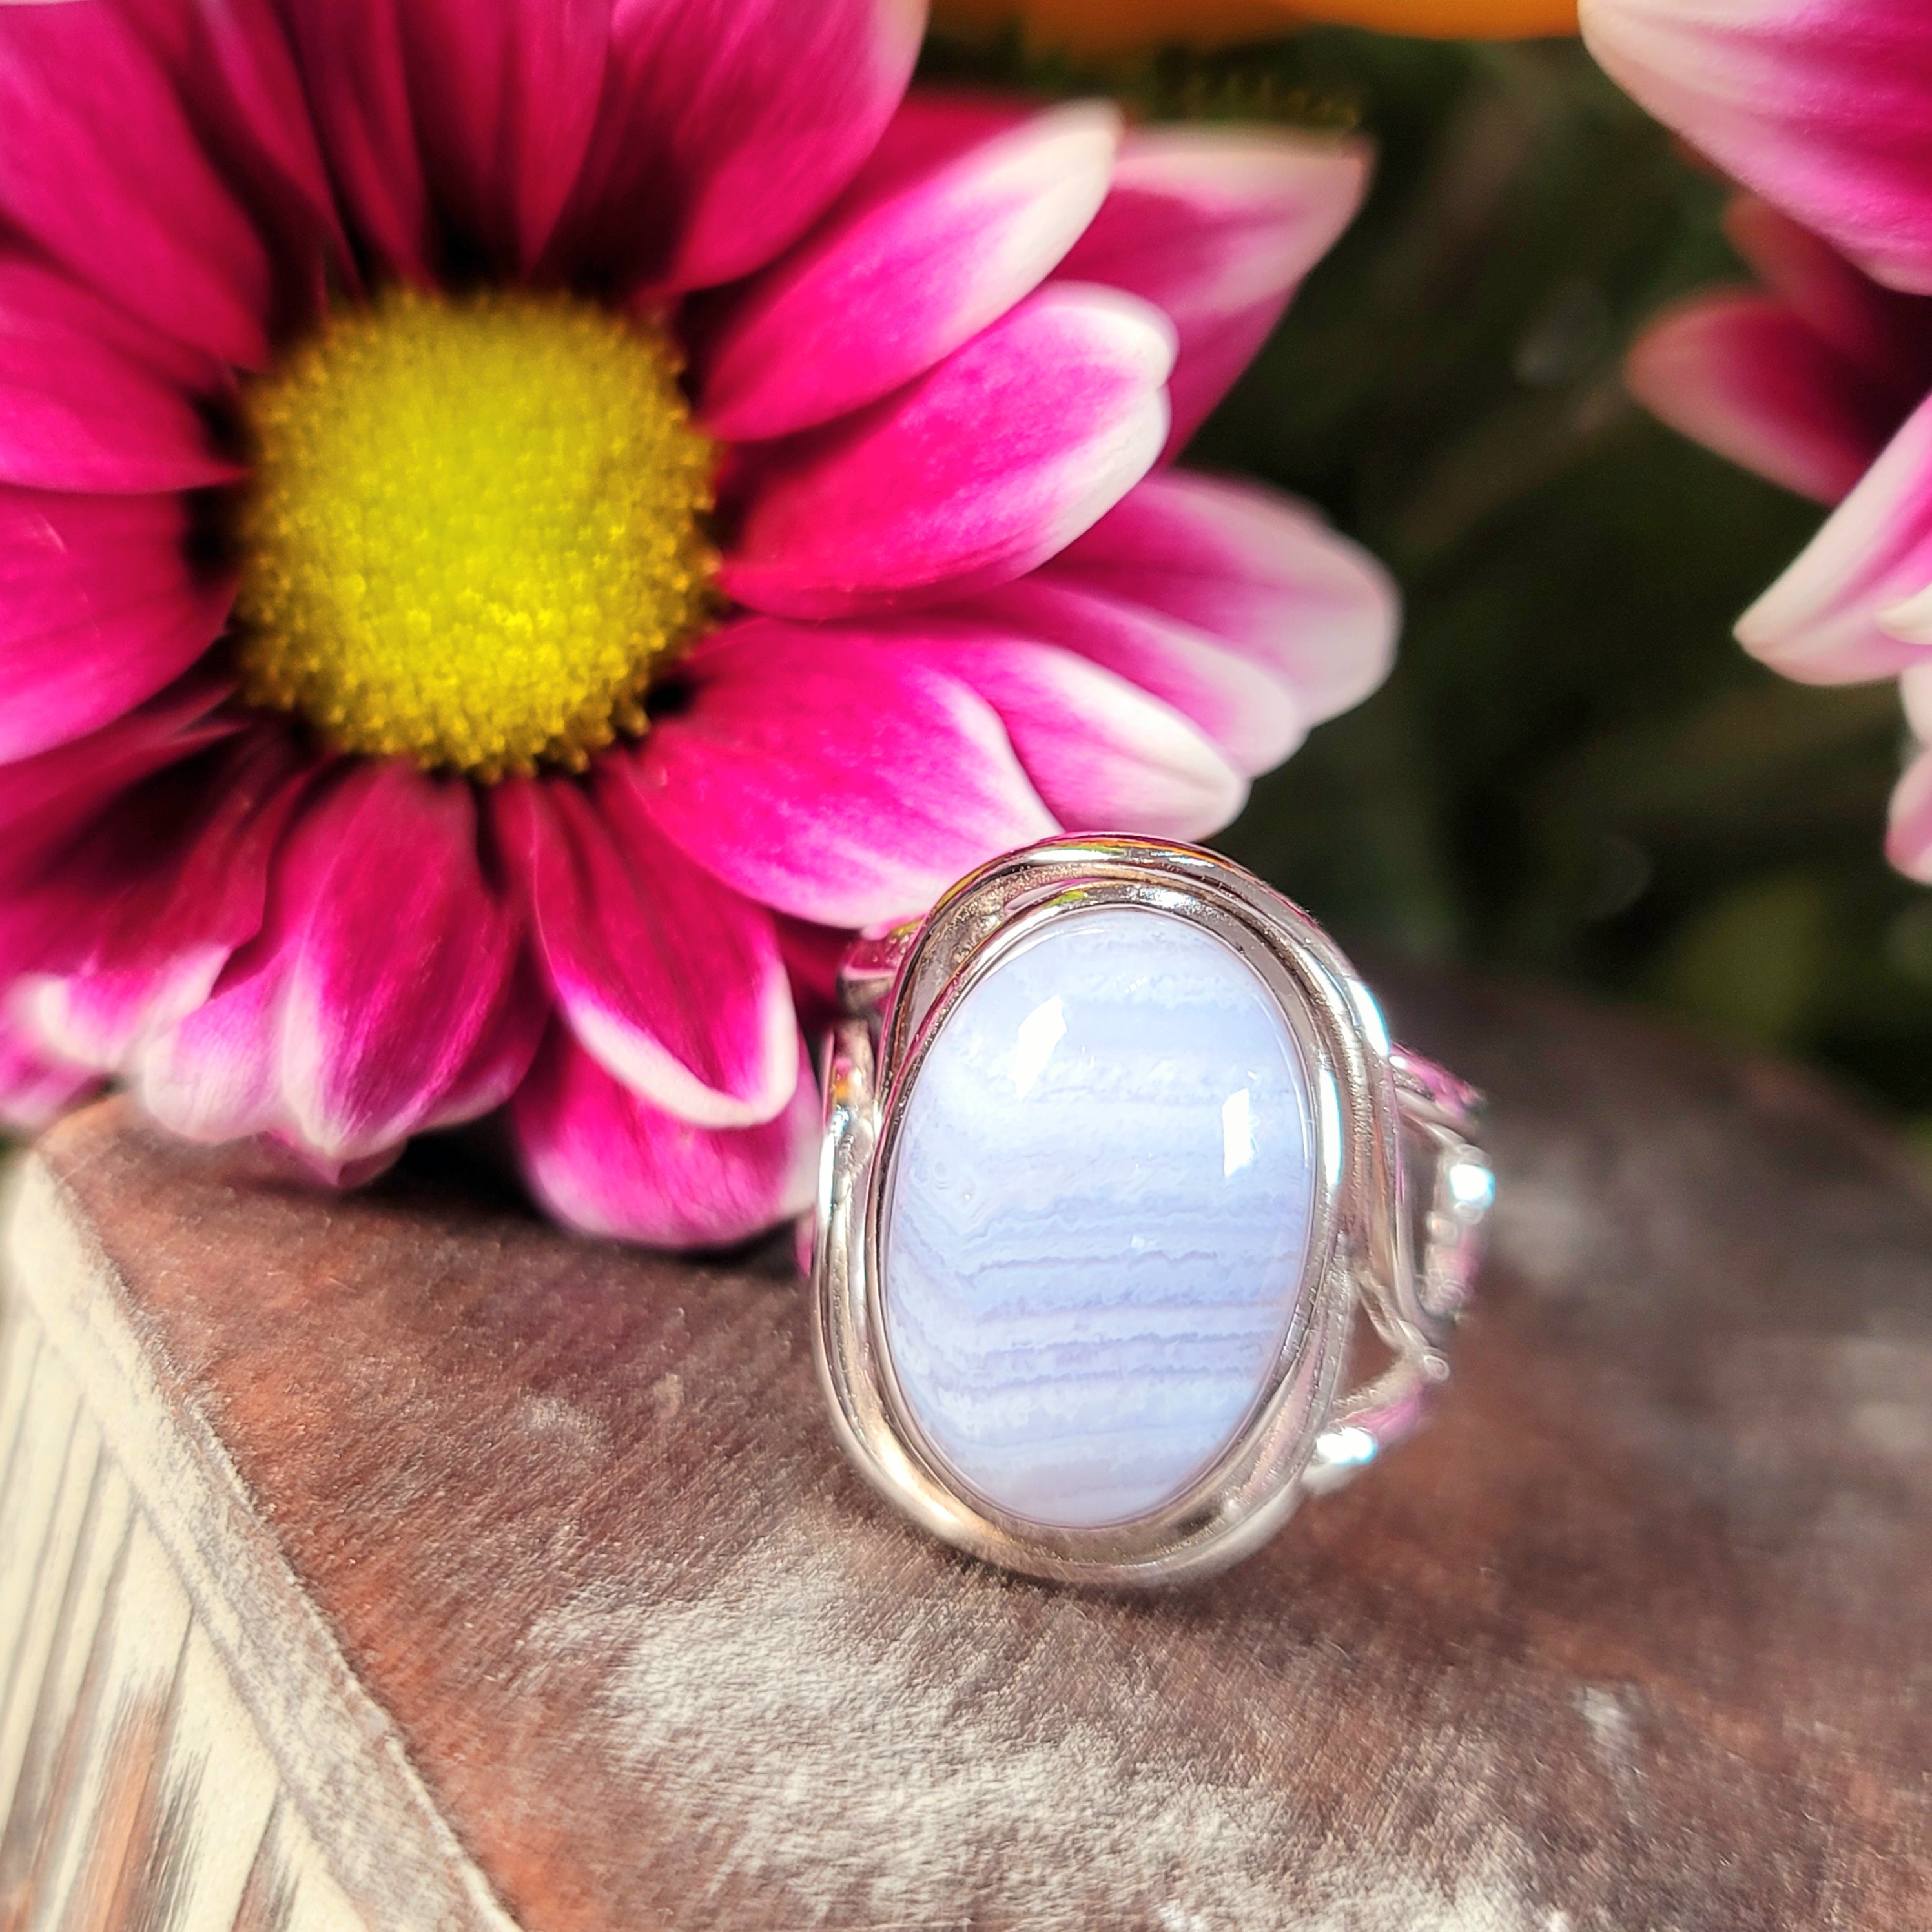 Blue Lace Agate Adjustable Finger Cuff Ring .925 Silver for Soothing Emotions and Improving Communication